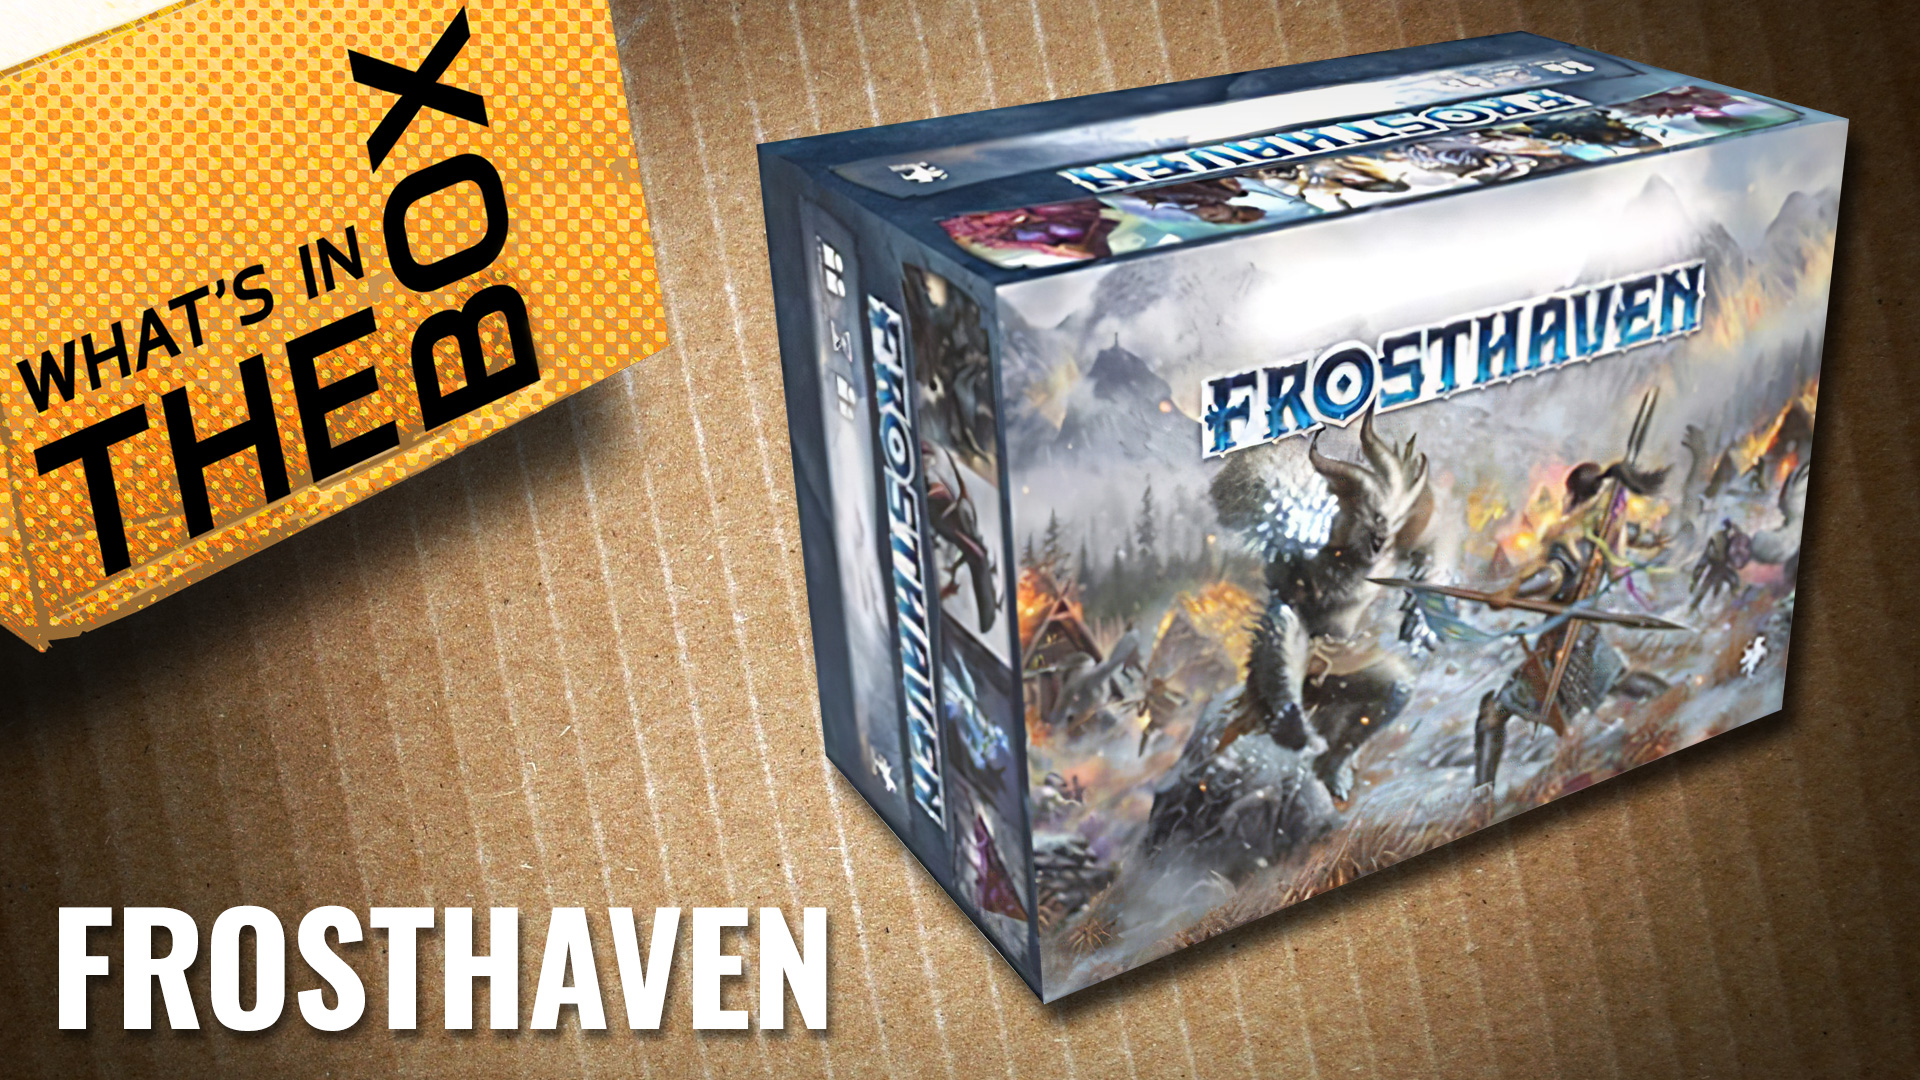 Unboxing---Frosthaven-coverimage